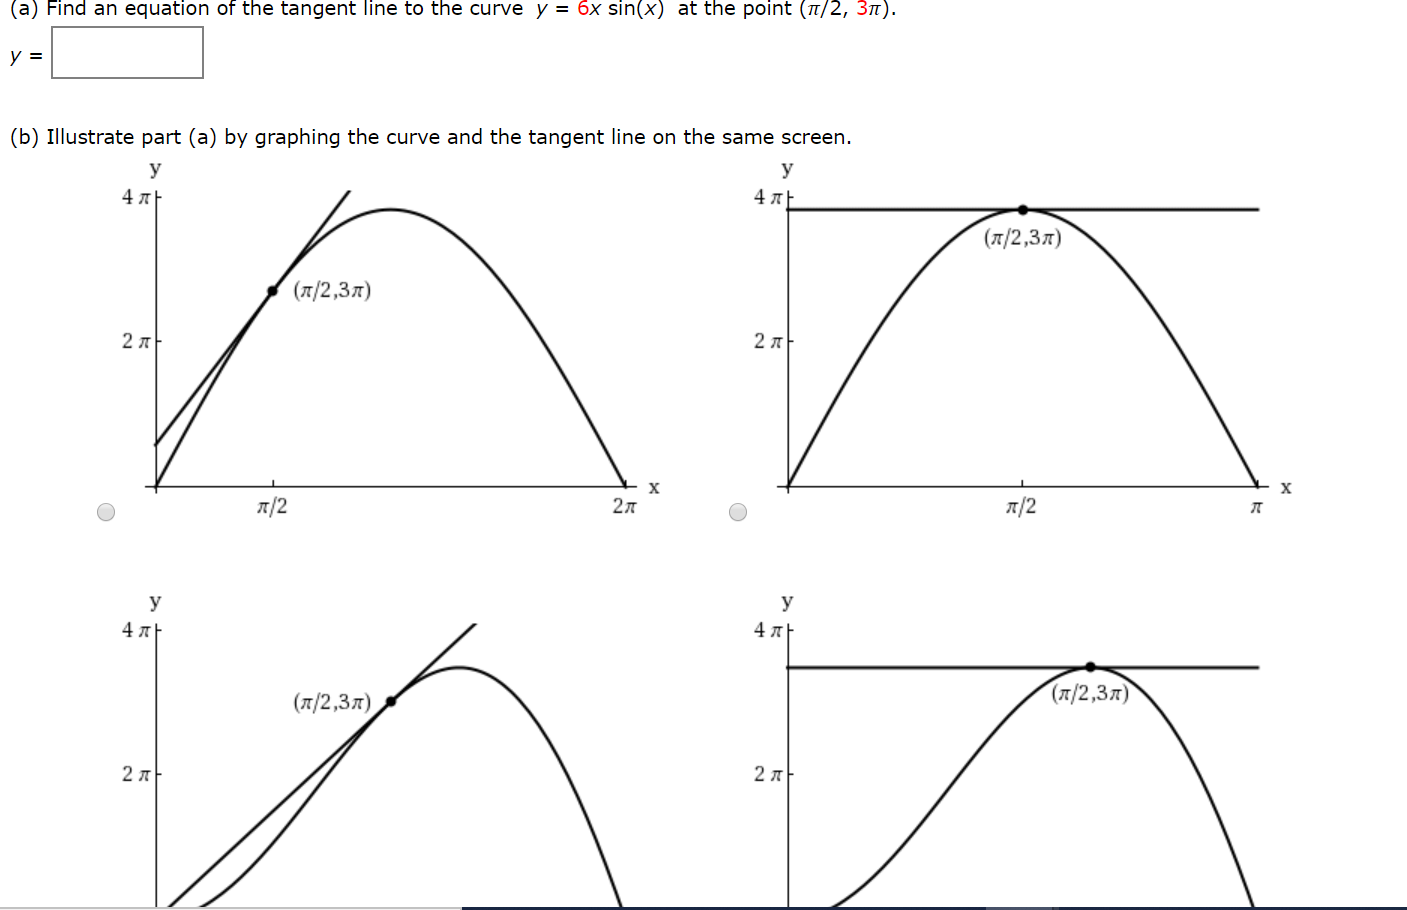 (a) Find an equation of the tangent line to the curve y = 6x sin(x) at the point (7/2, 3n).
(b) Illustrate part (a) by graphing the curve and the tangent line on the same screen.
У
У
4 A
4 AE
(T/2,37)
(л/2,3л)
2 л
2 л
х
х
7/2
2л
л/2
y
4 л
4 л+
(л/2,3л)
(7/2,37)
2 7
2 A
